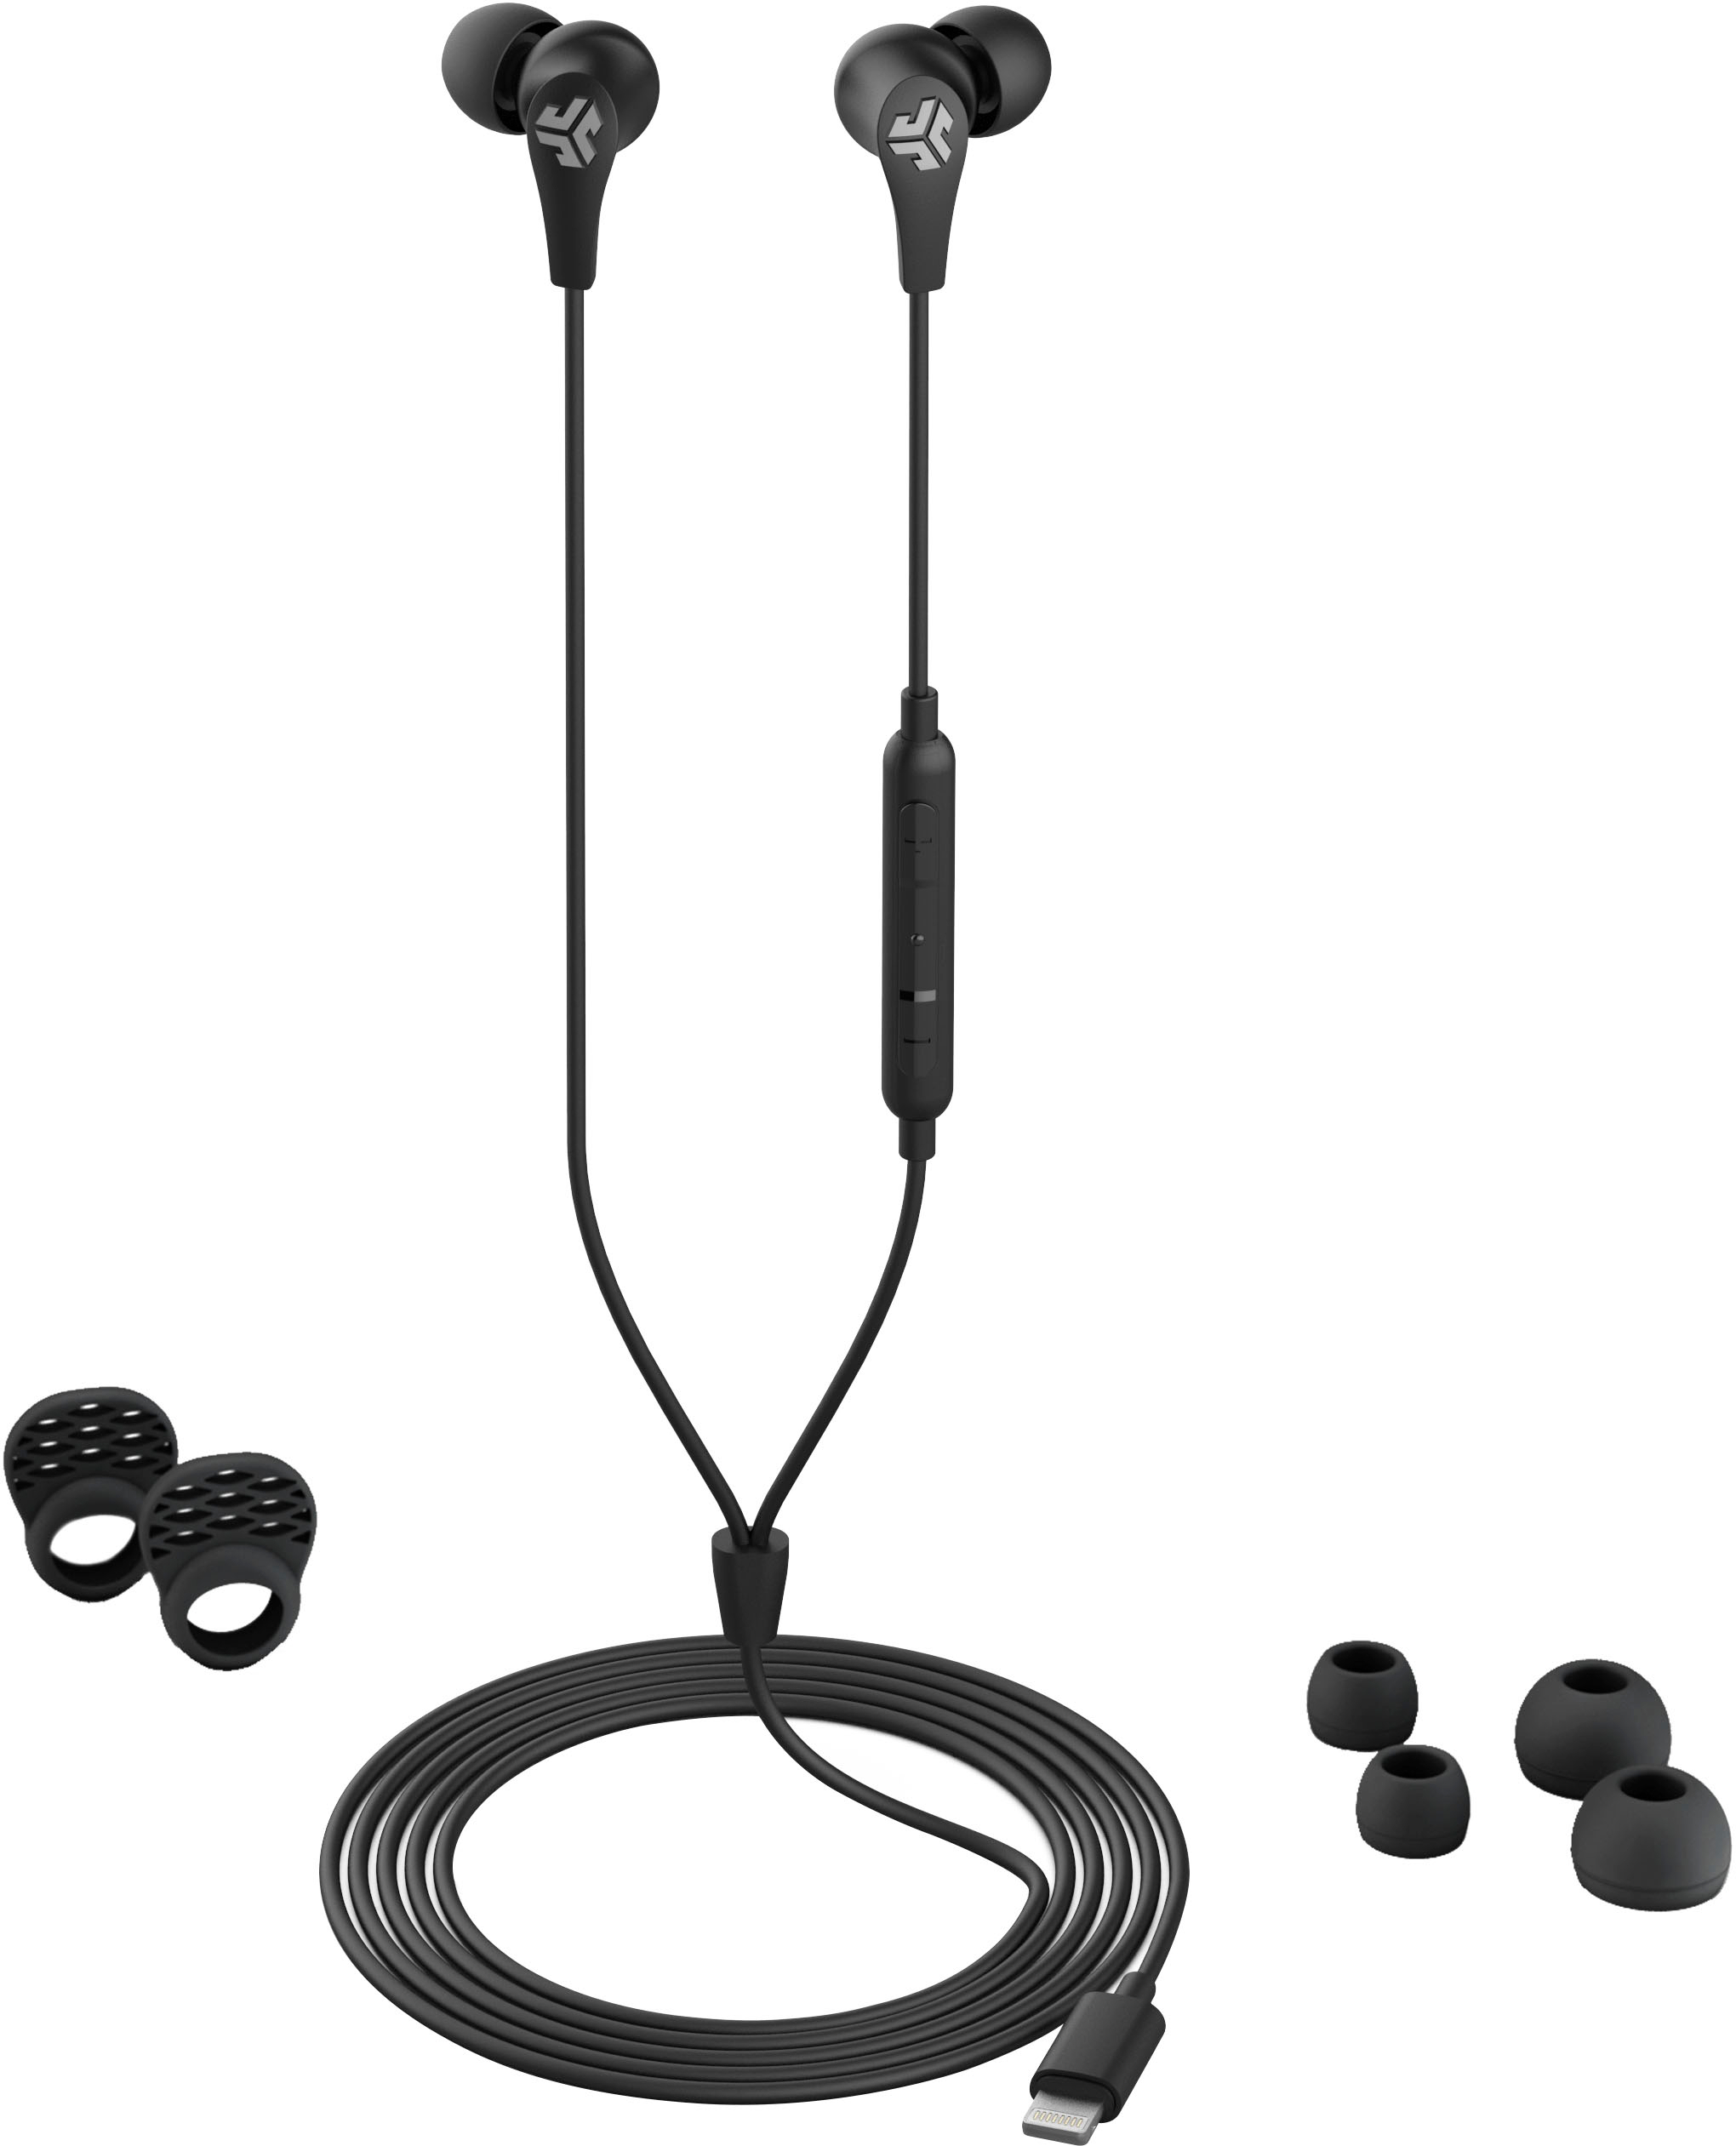 Angle View: JLab - JBuds Pro Lightning Wired Earbuds